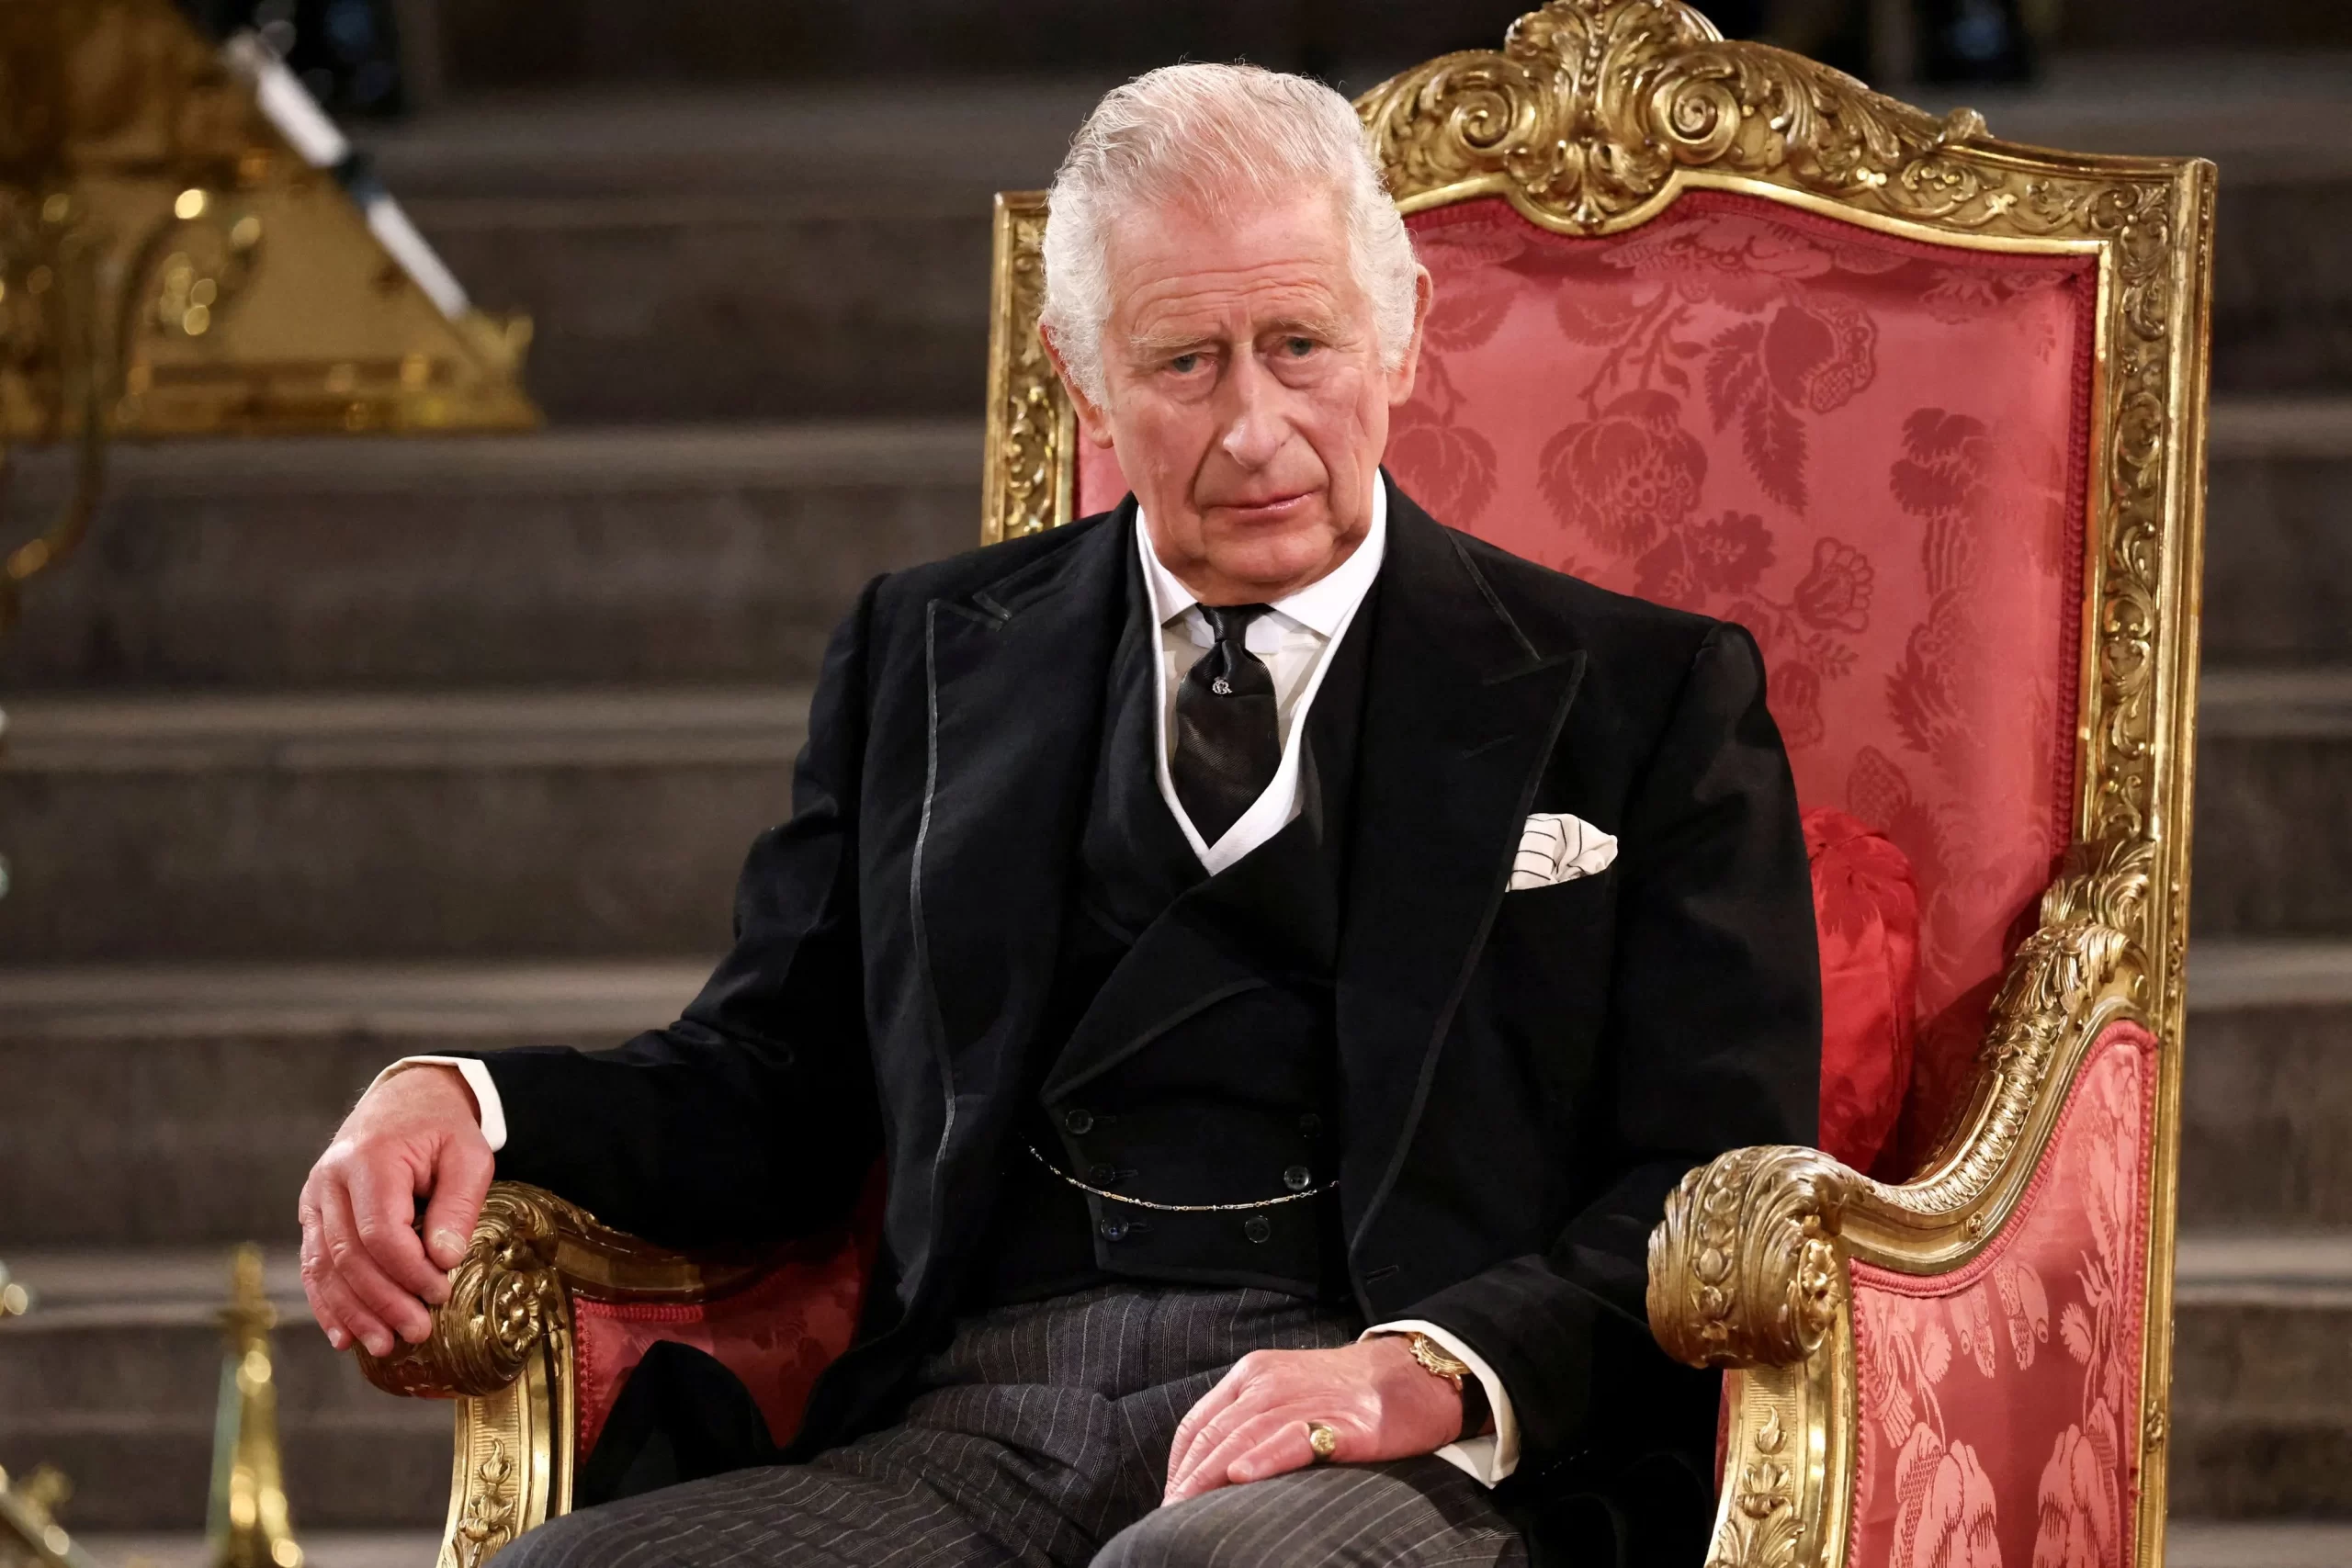 Funeral plans for King Charles amended as new reports emerge